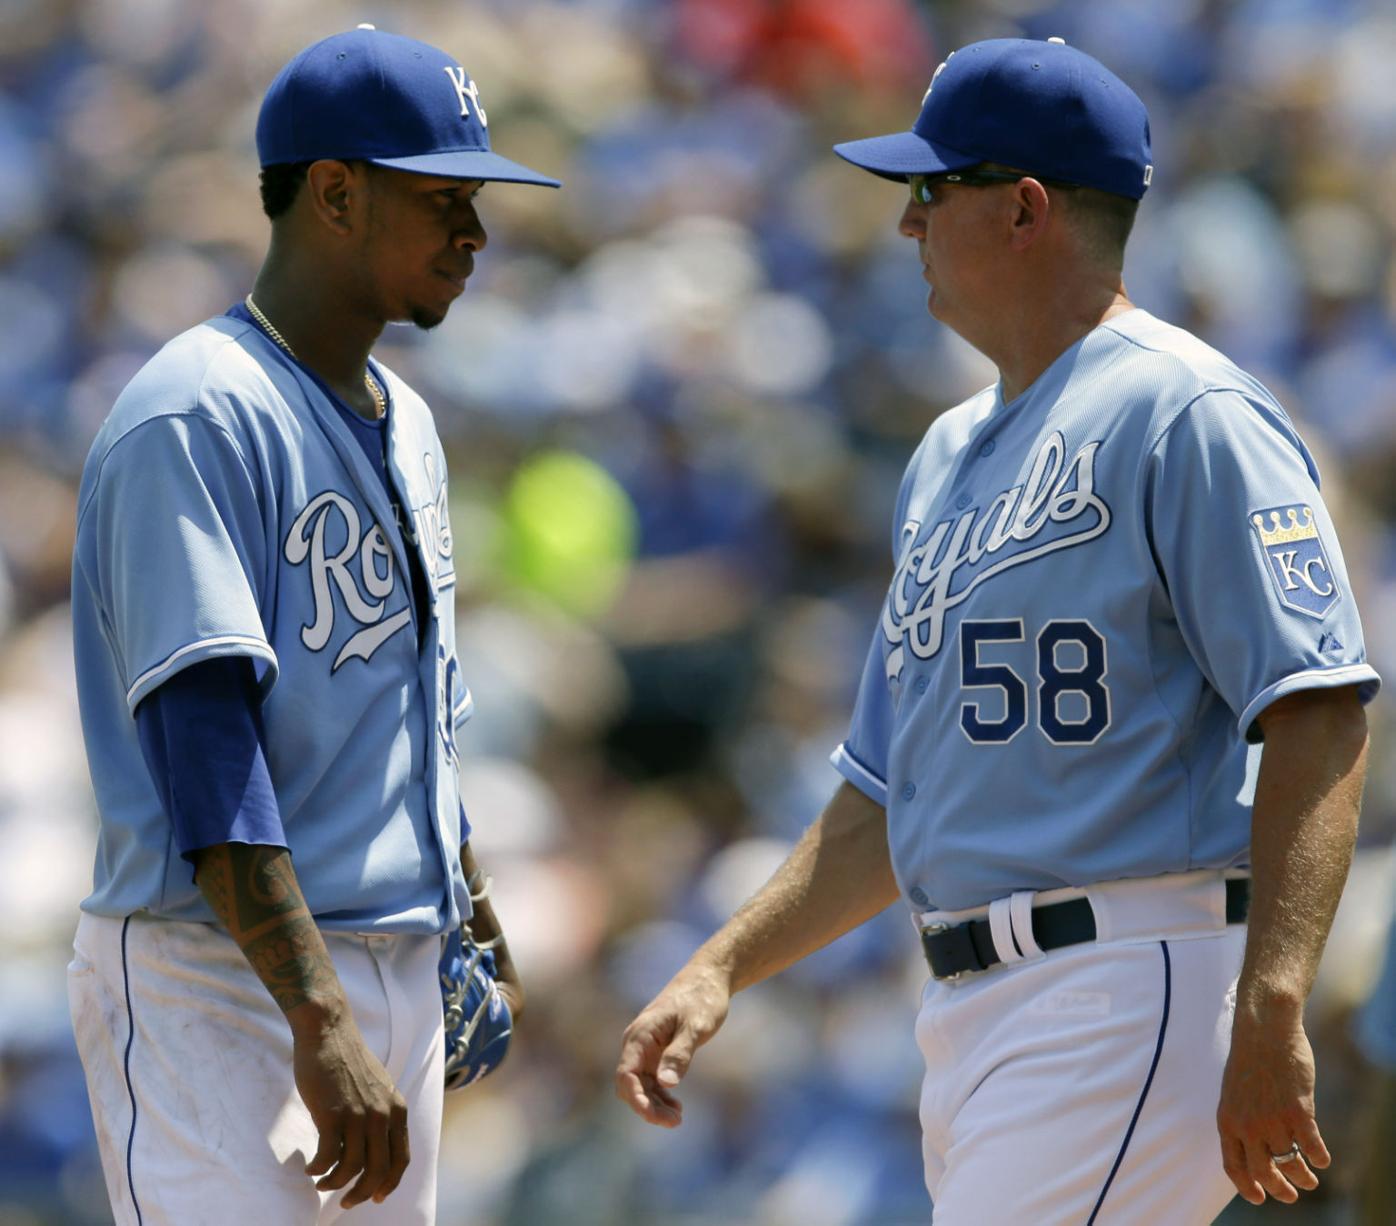 Ventura out early, KC falls to Rangers, 9th loss in 11 games